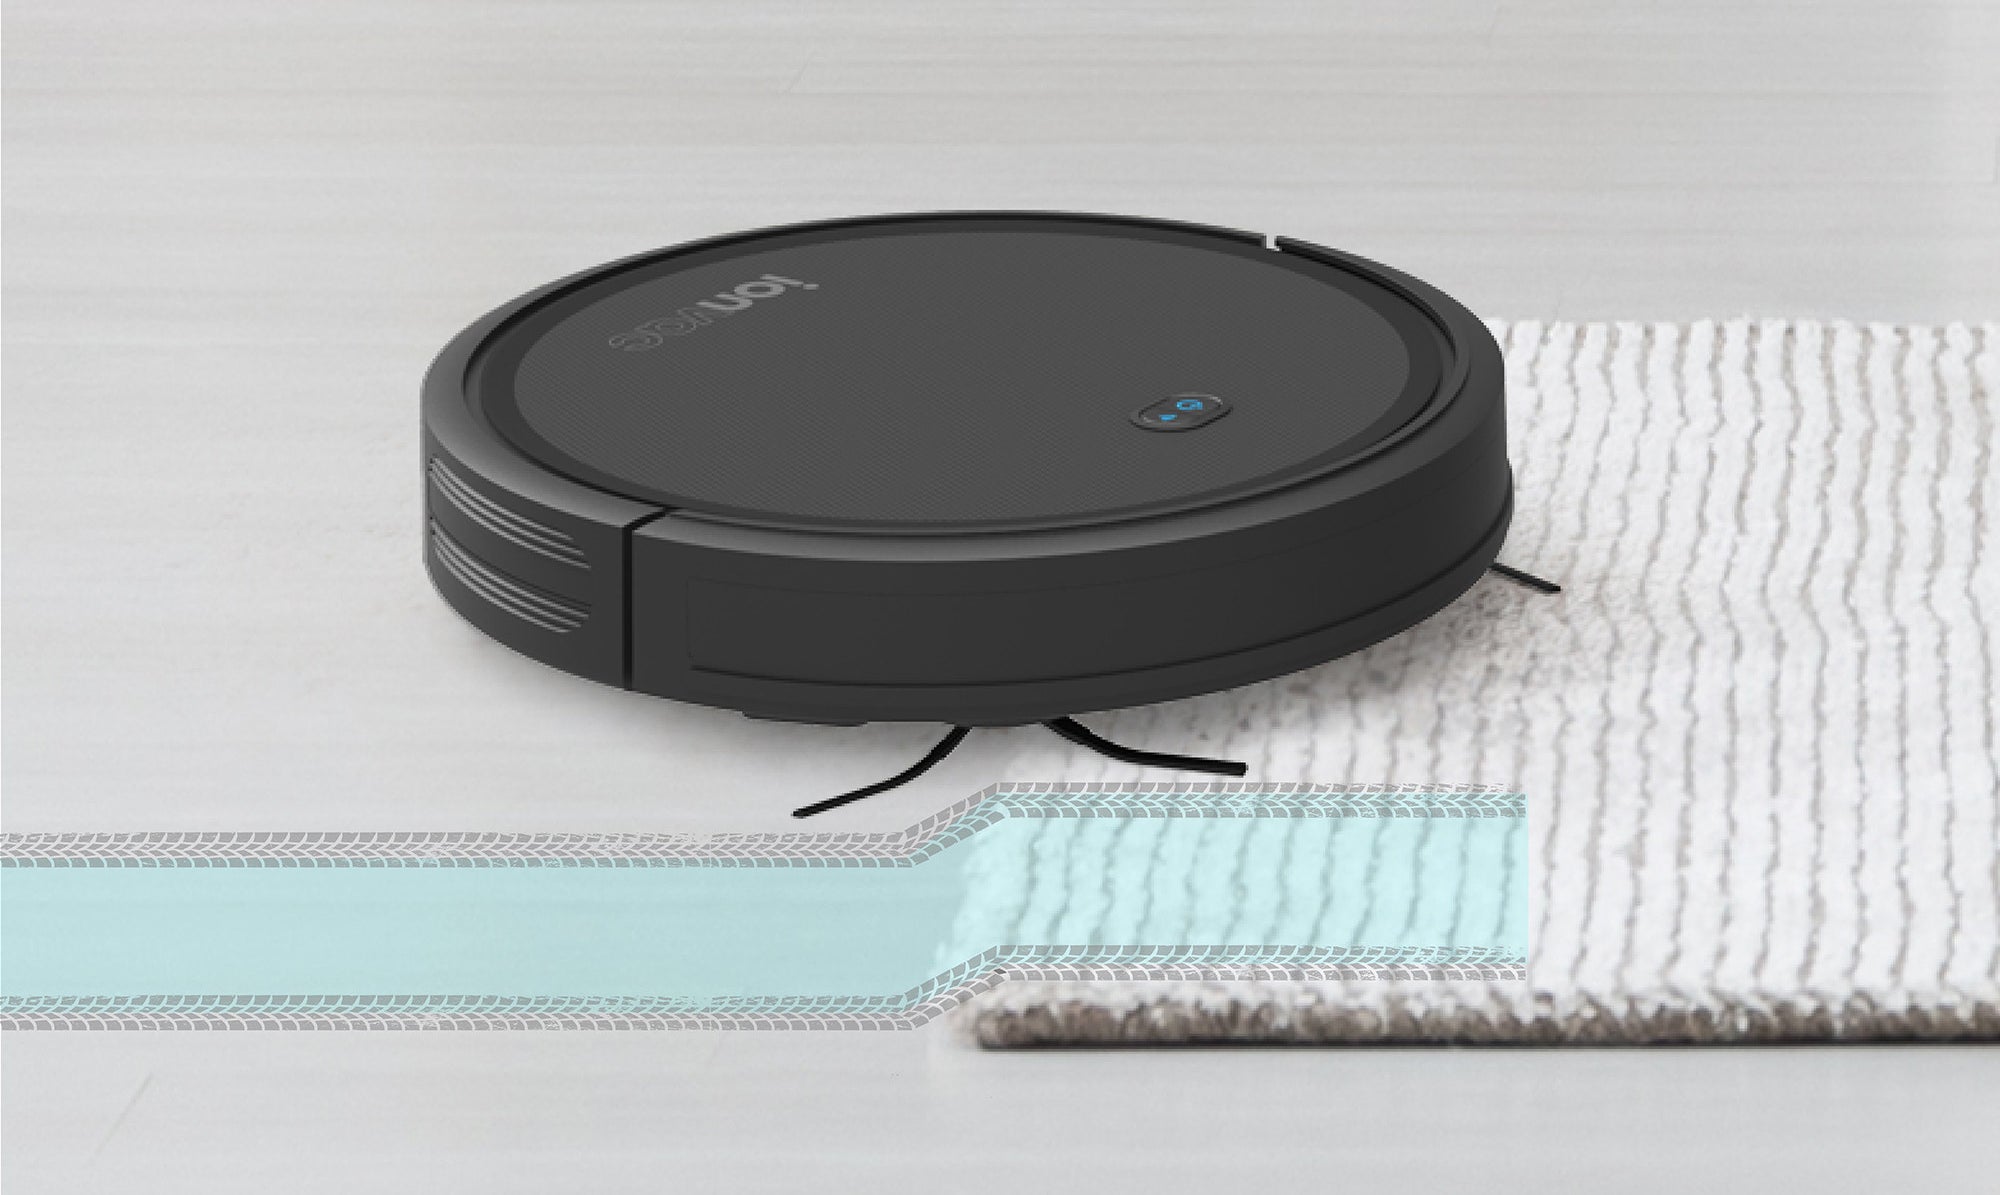 ionvac robot vacuum going up on a rug